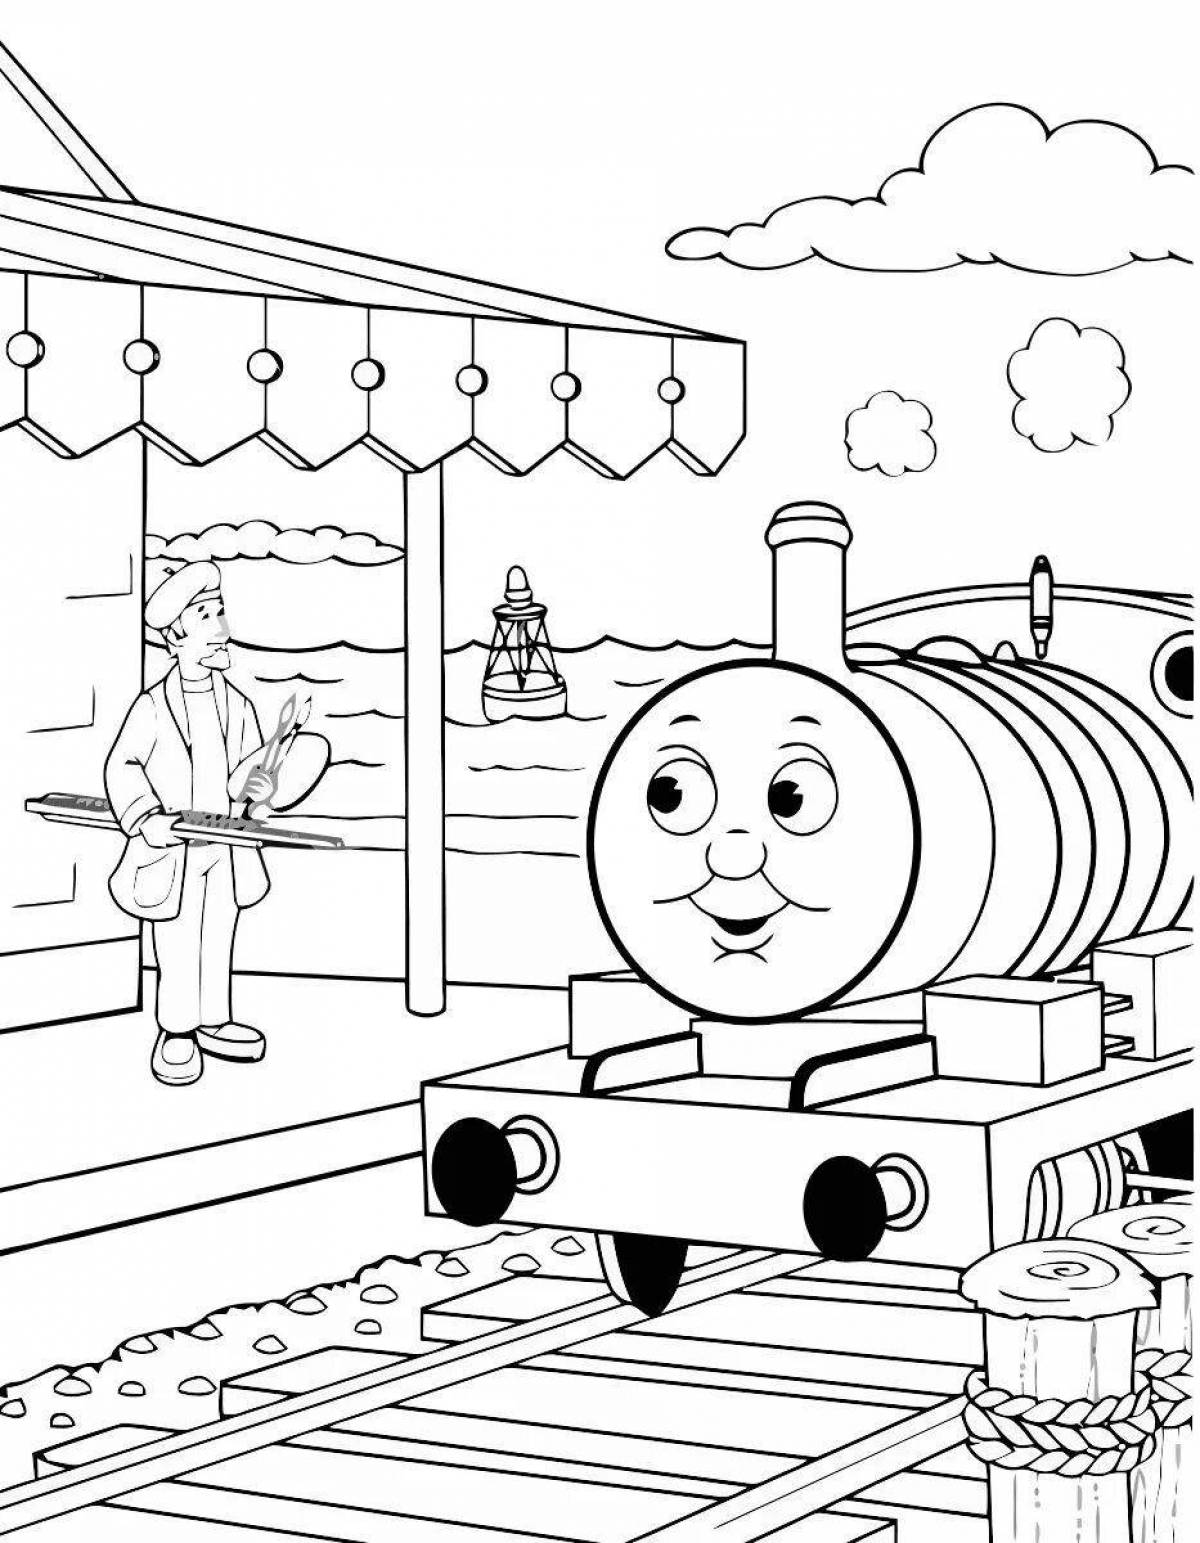 Thomas' playful coloring page for kids